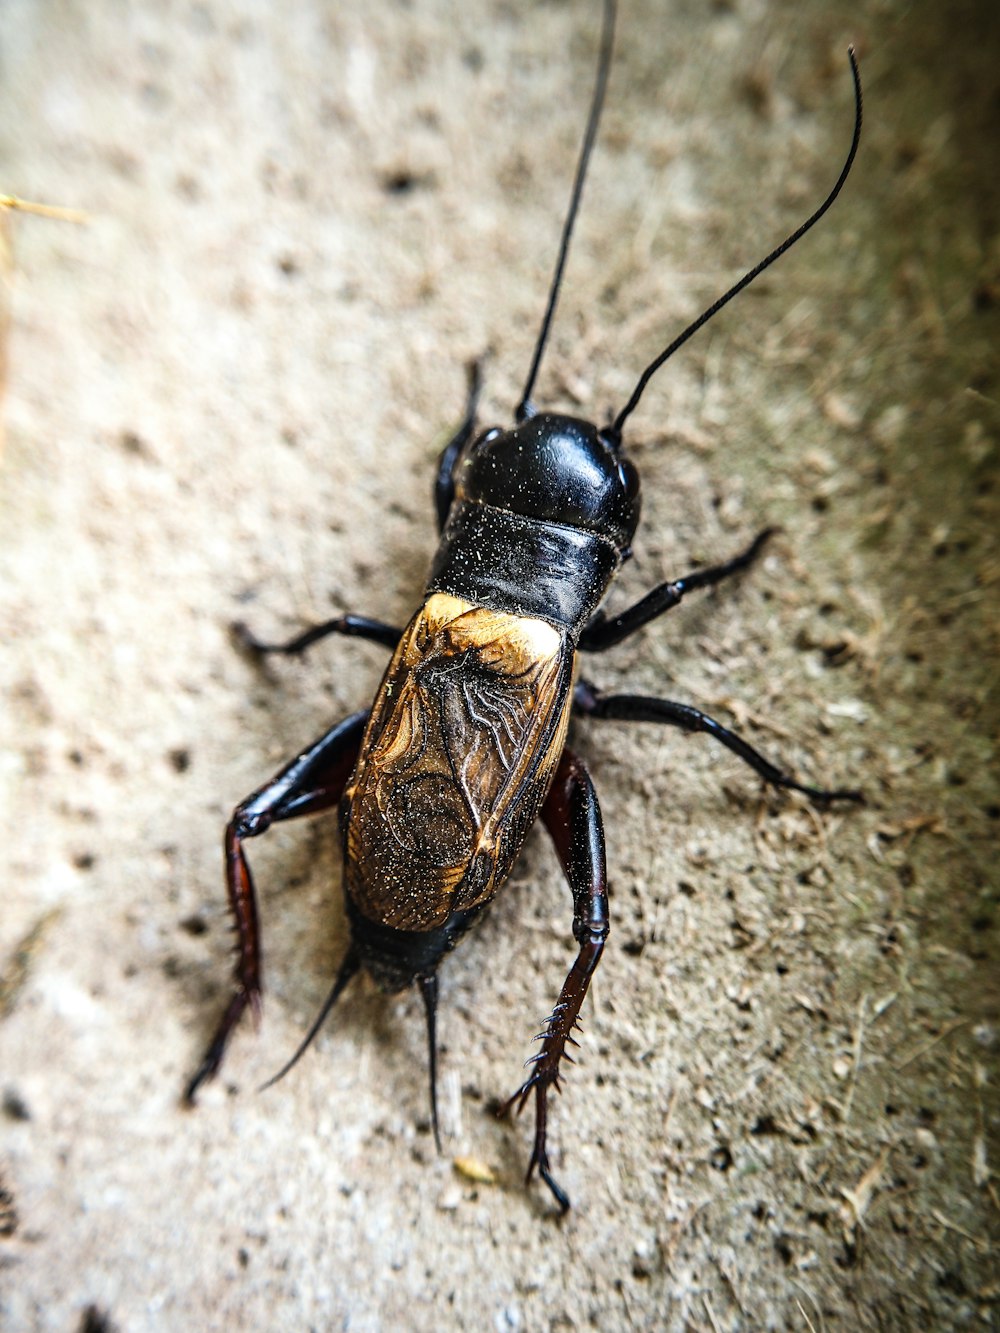 a close up of a bug on the ground